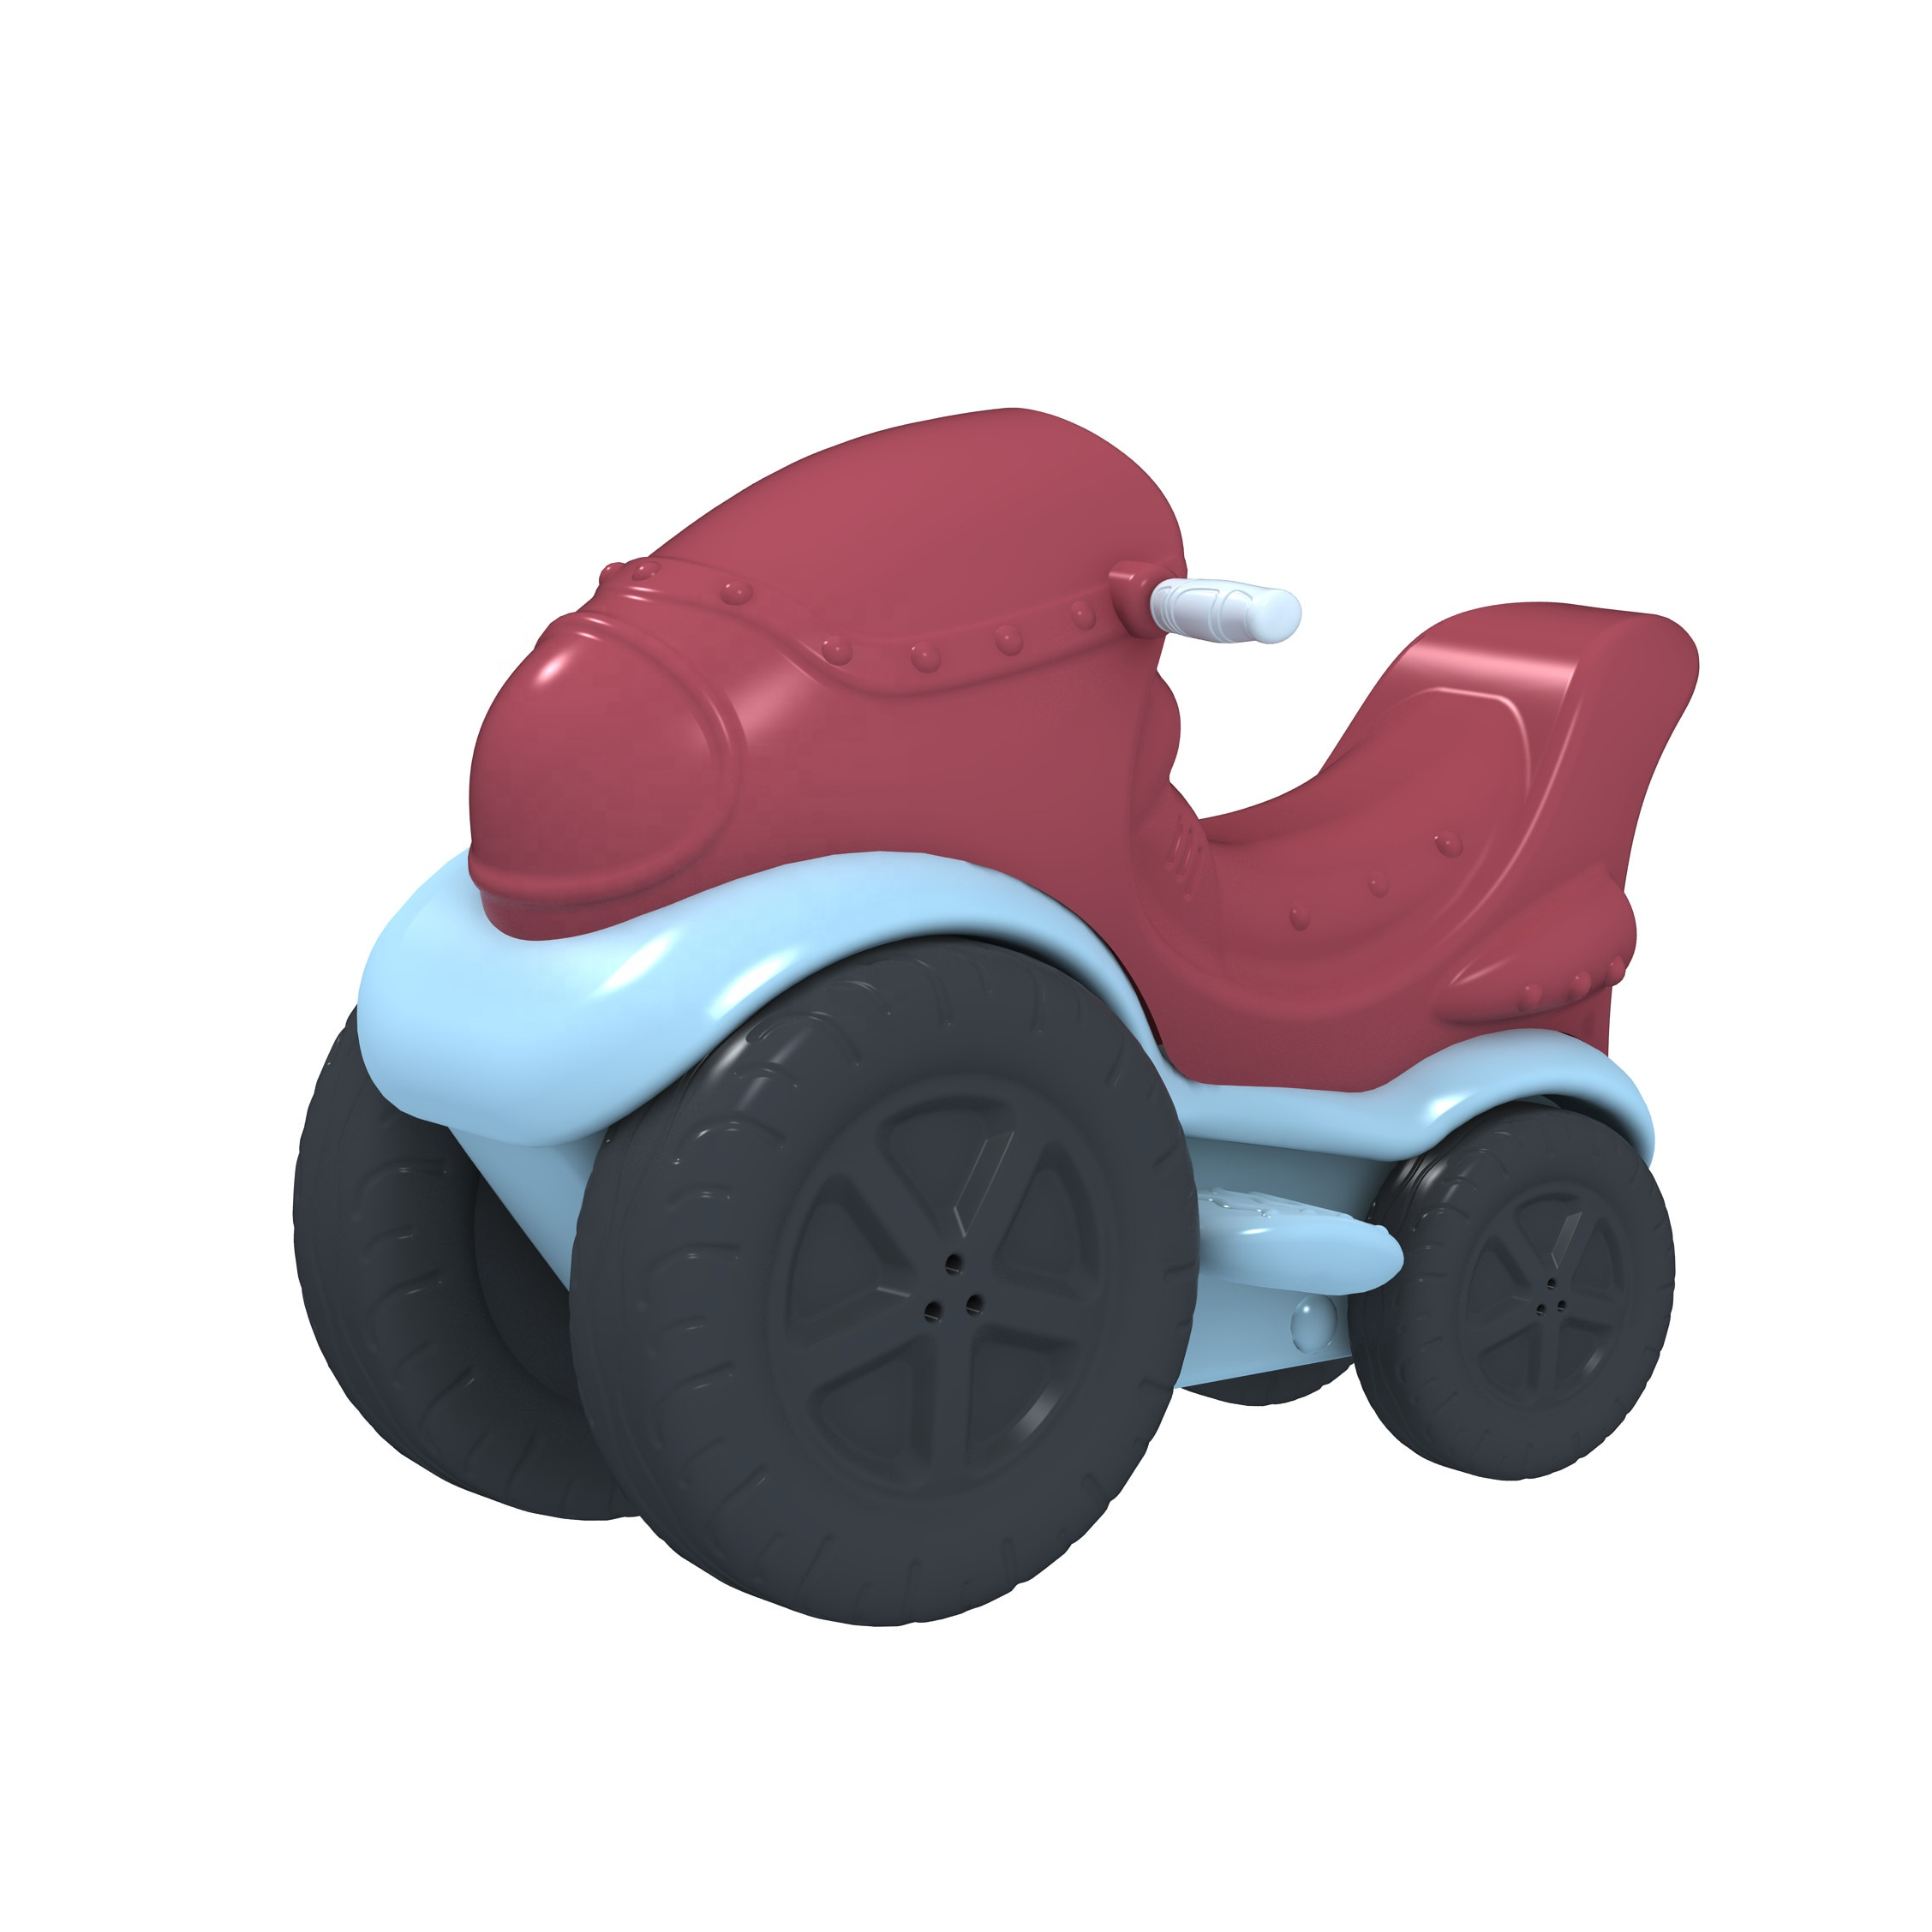 IDO outdoor playground tank children playground outdoor small car interesting electric toy car